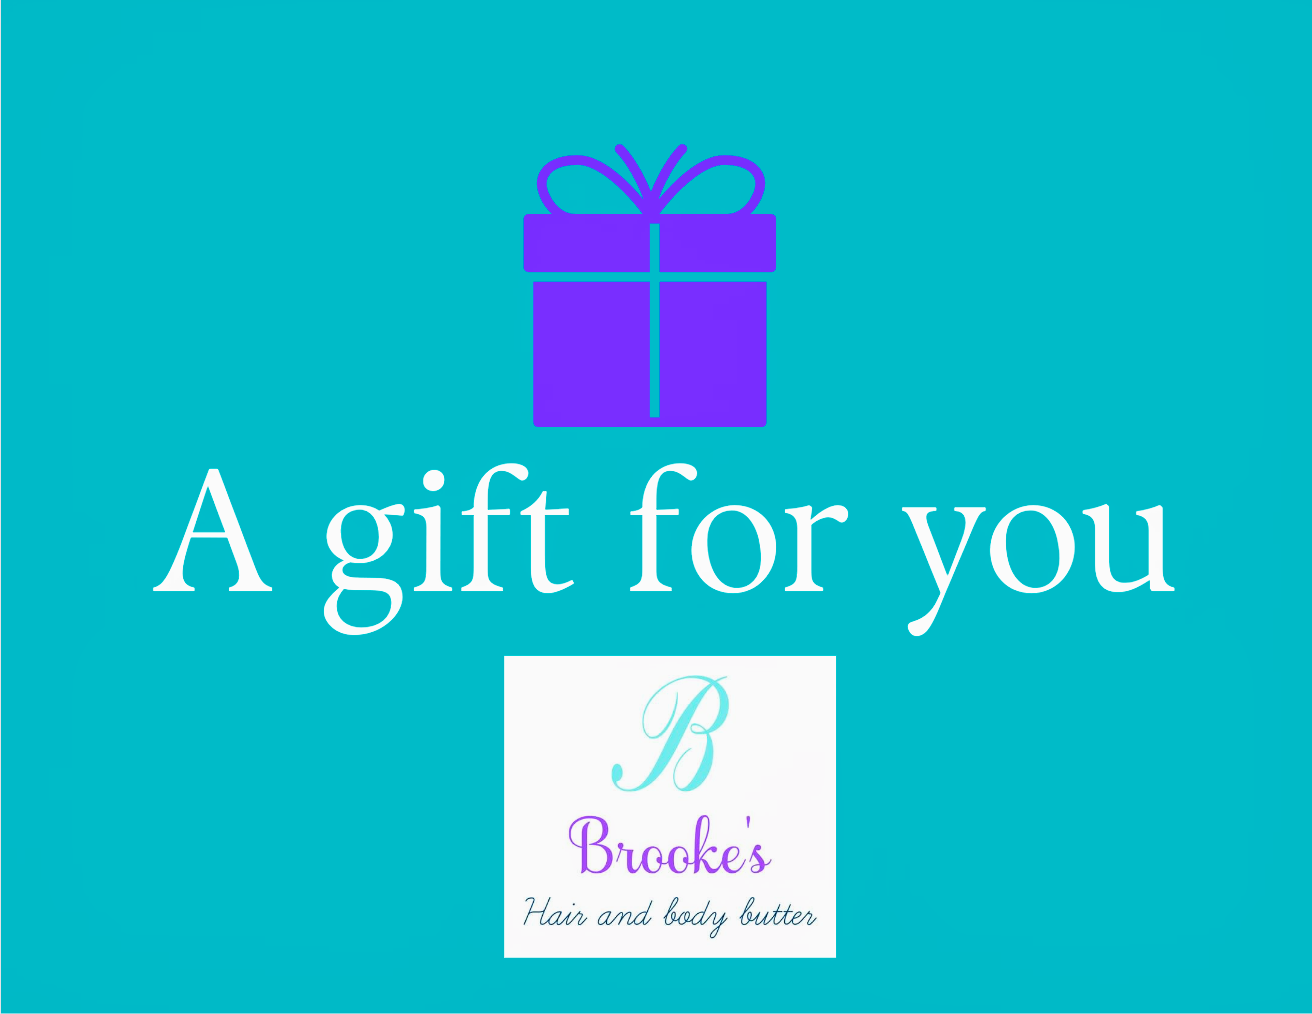 Brooke's Hair and Body Butter Gift Card